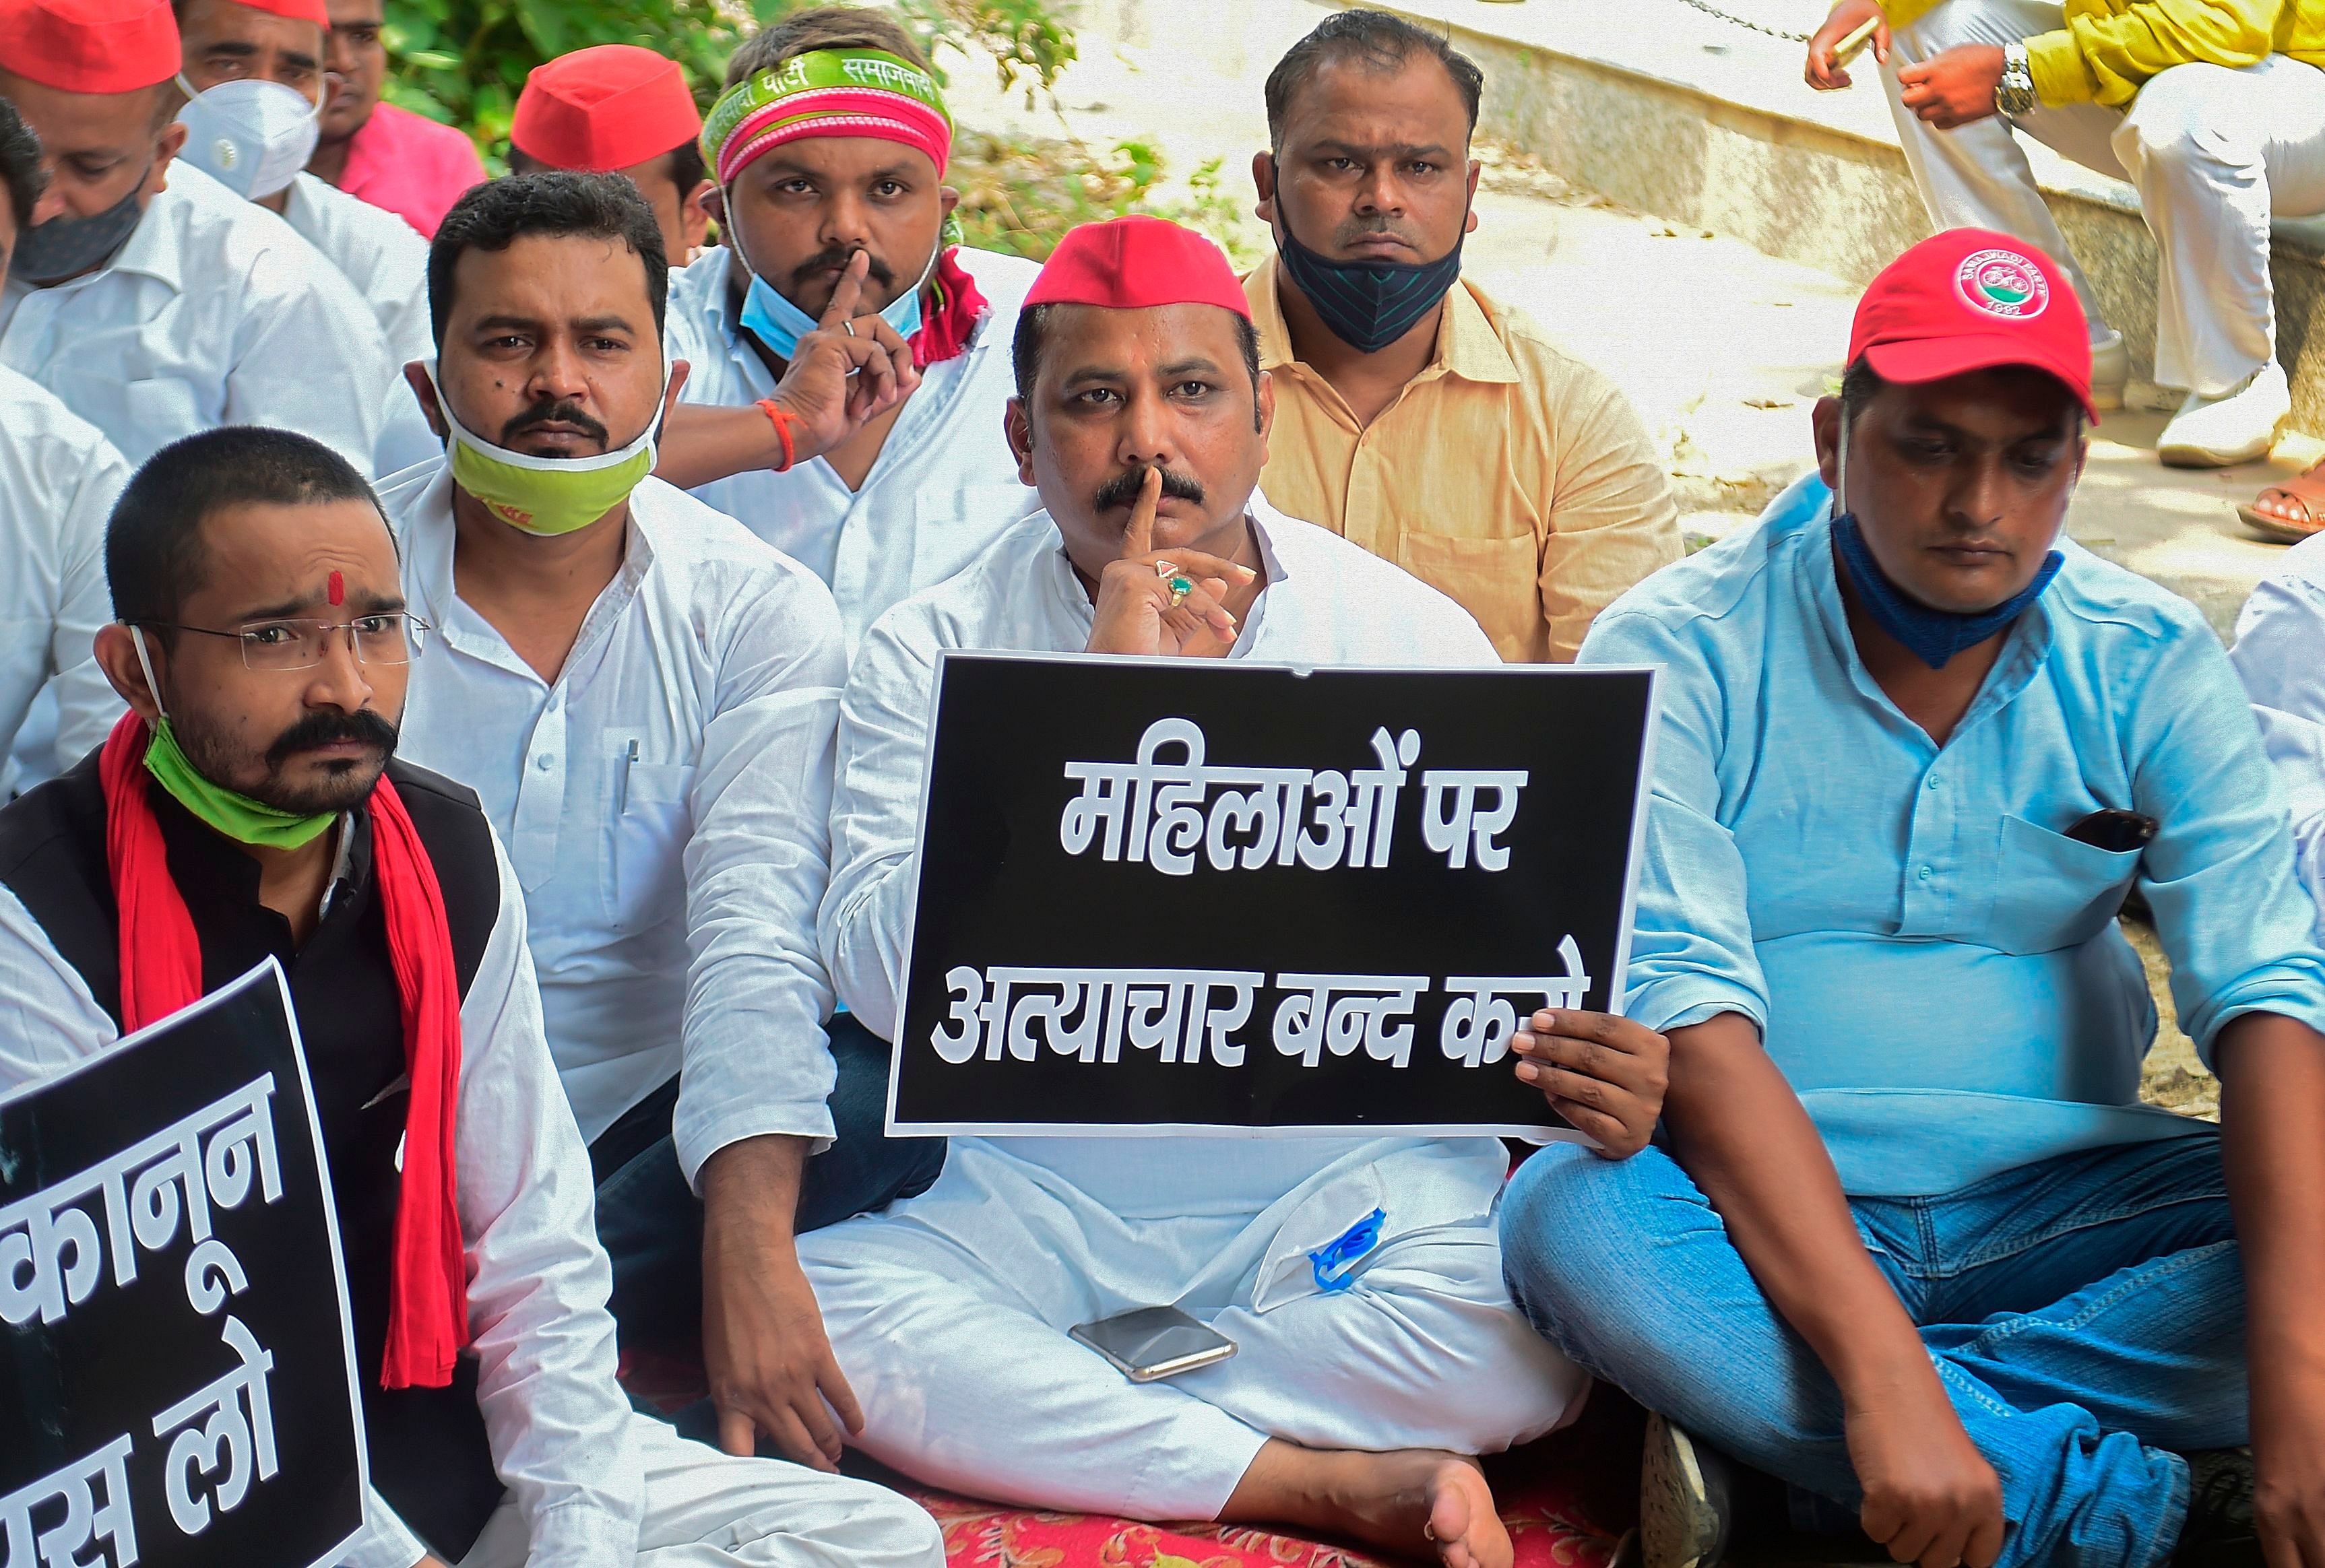 Supporters of the Samajwadi party during a silent protest against the alleged gang-rape of a 19 year-old woman by four men in Bool Garhi village of Uttar Pradesh state and various issues, in Allahabad on October 2, 2020. . - Indian police have been ordered to provide protection to the "untouchable" family of a woman allegedly gang-raped and killed by four upper-caste men, as her brother said they feared for their lives. The 19-year-old was attacked in mid-September and died this week, sparking outrage and shining the spotlight again on the alarming levels of sexual violence against Indian women, particularly if they are low-caste.Credit: AFP